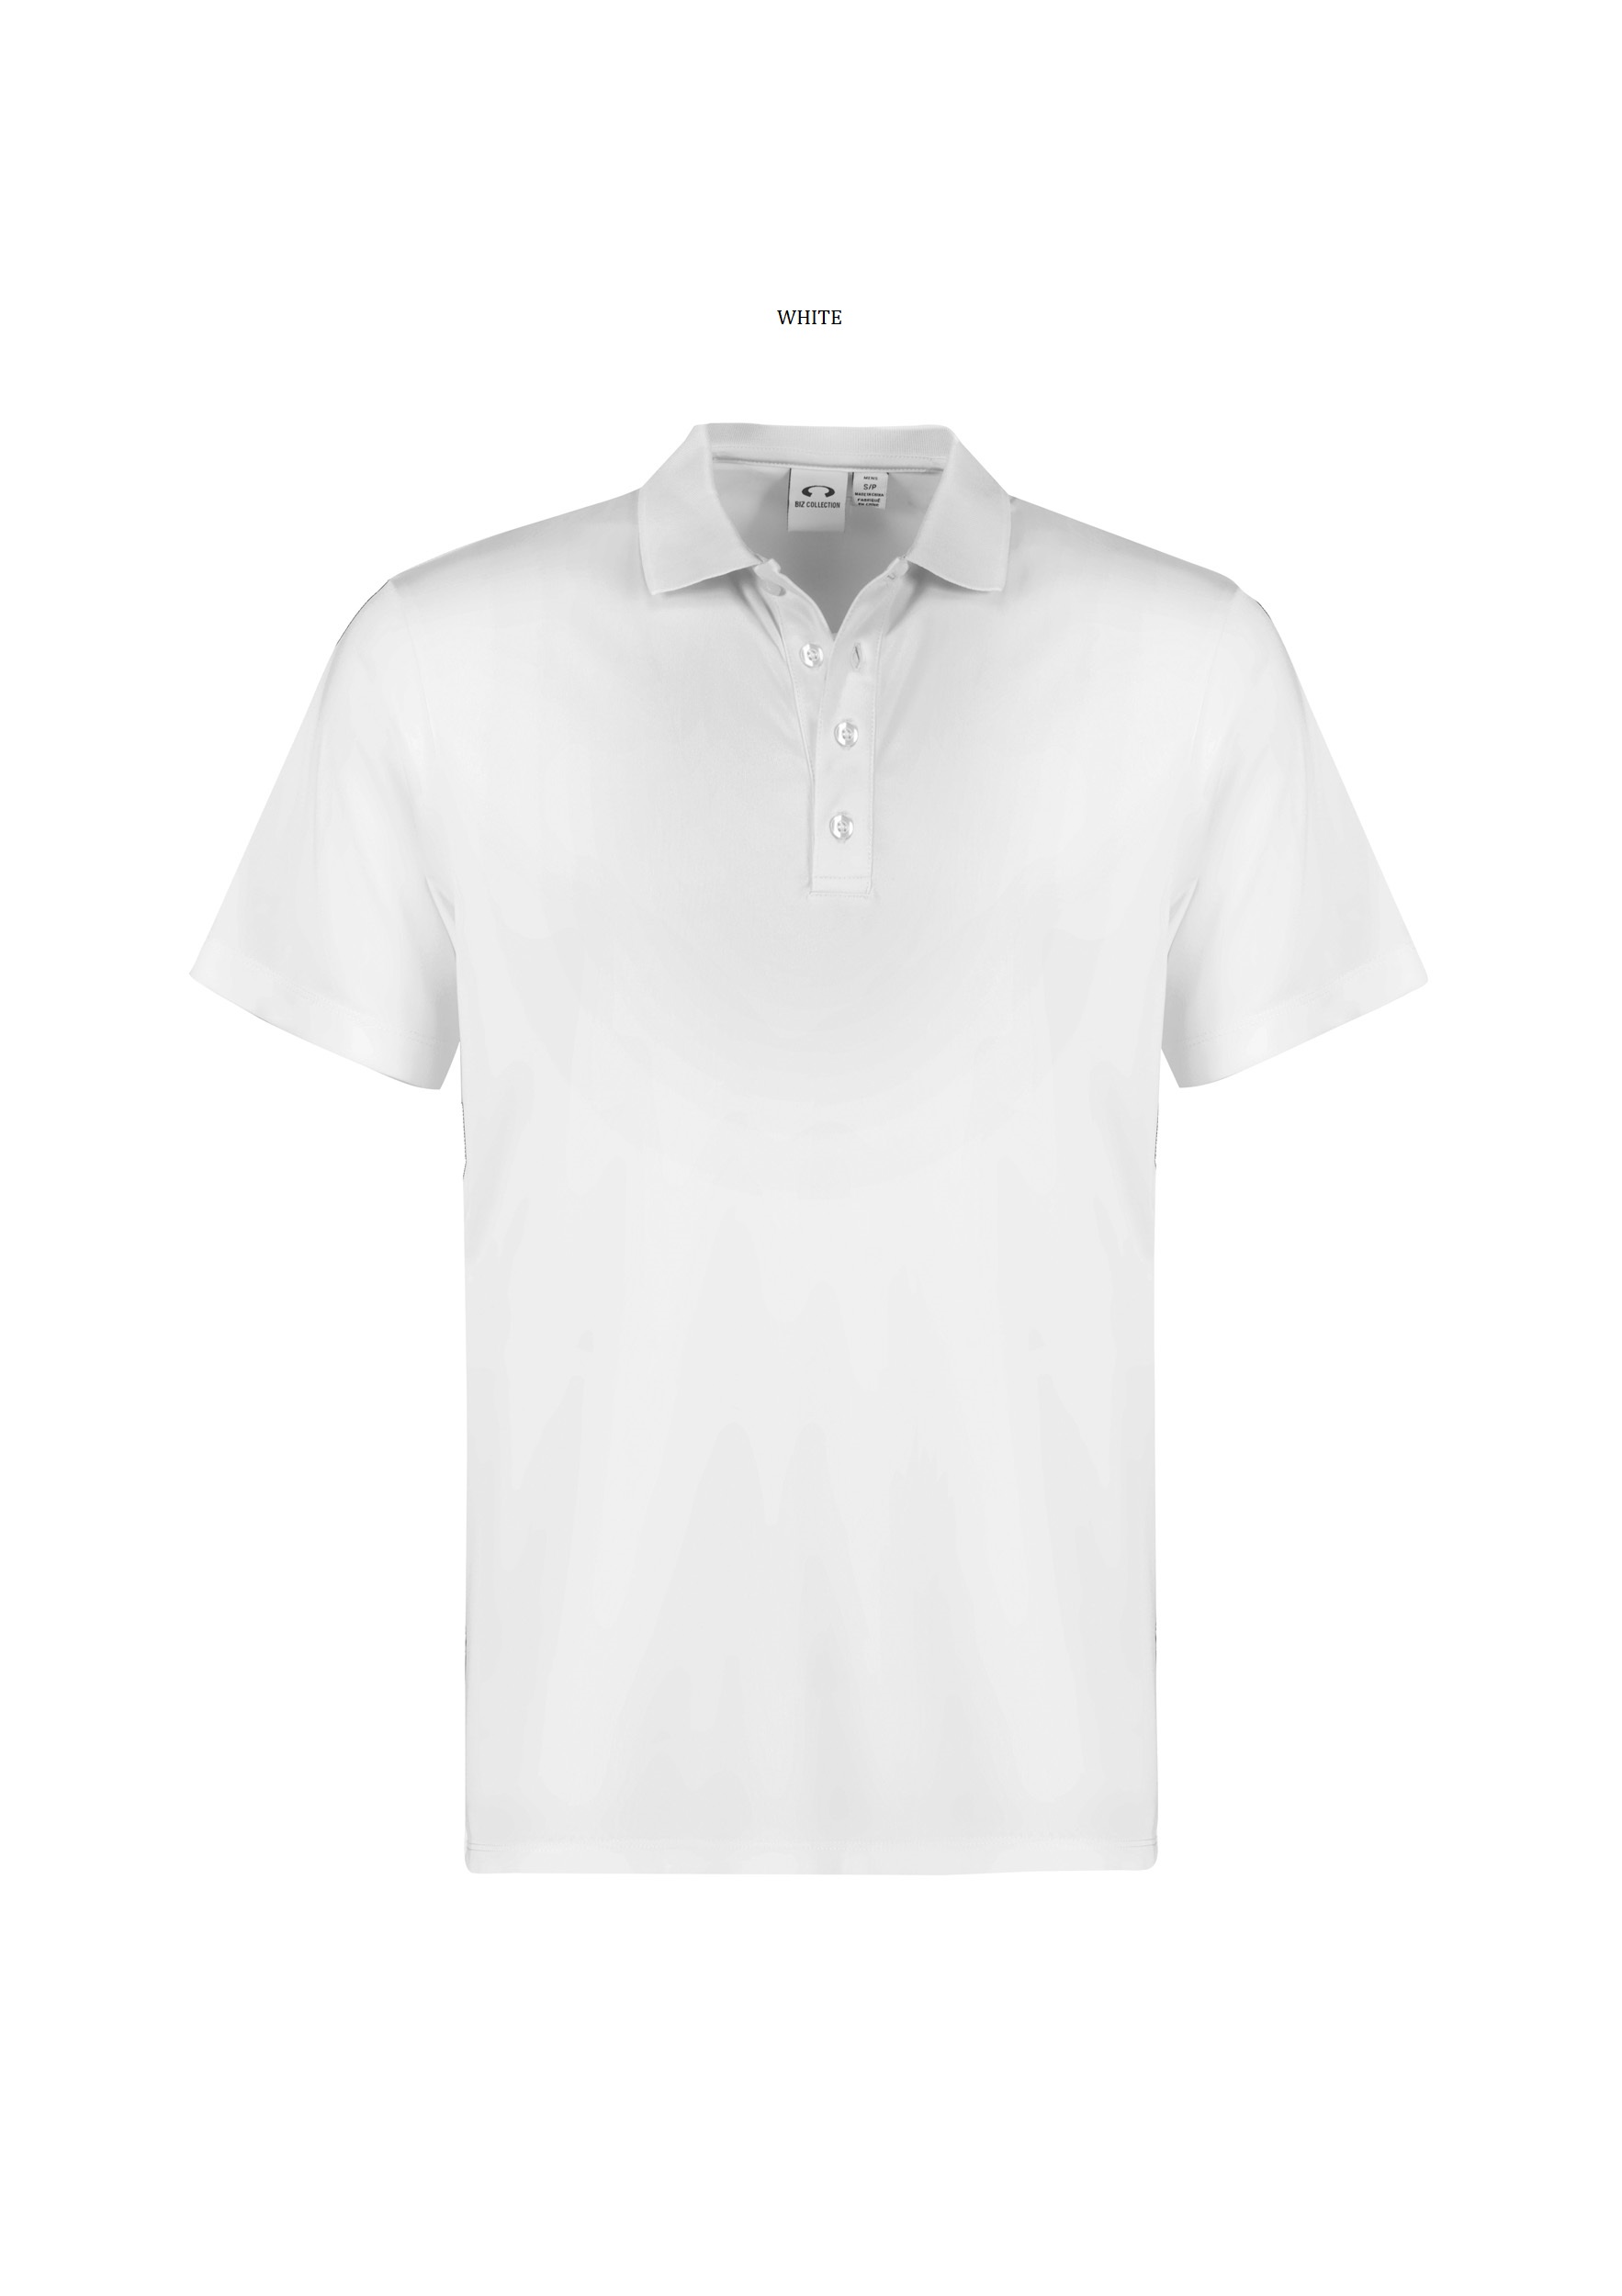 Action Mens Polo by Biz Collection - Online Uniforms